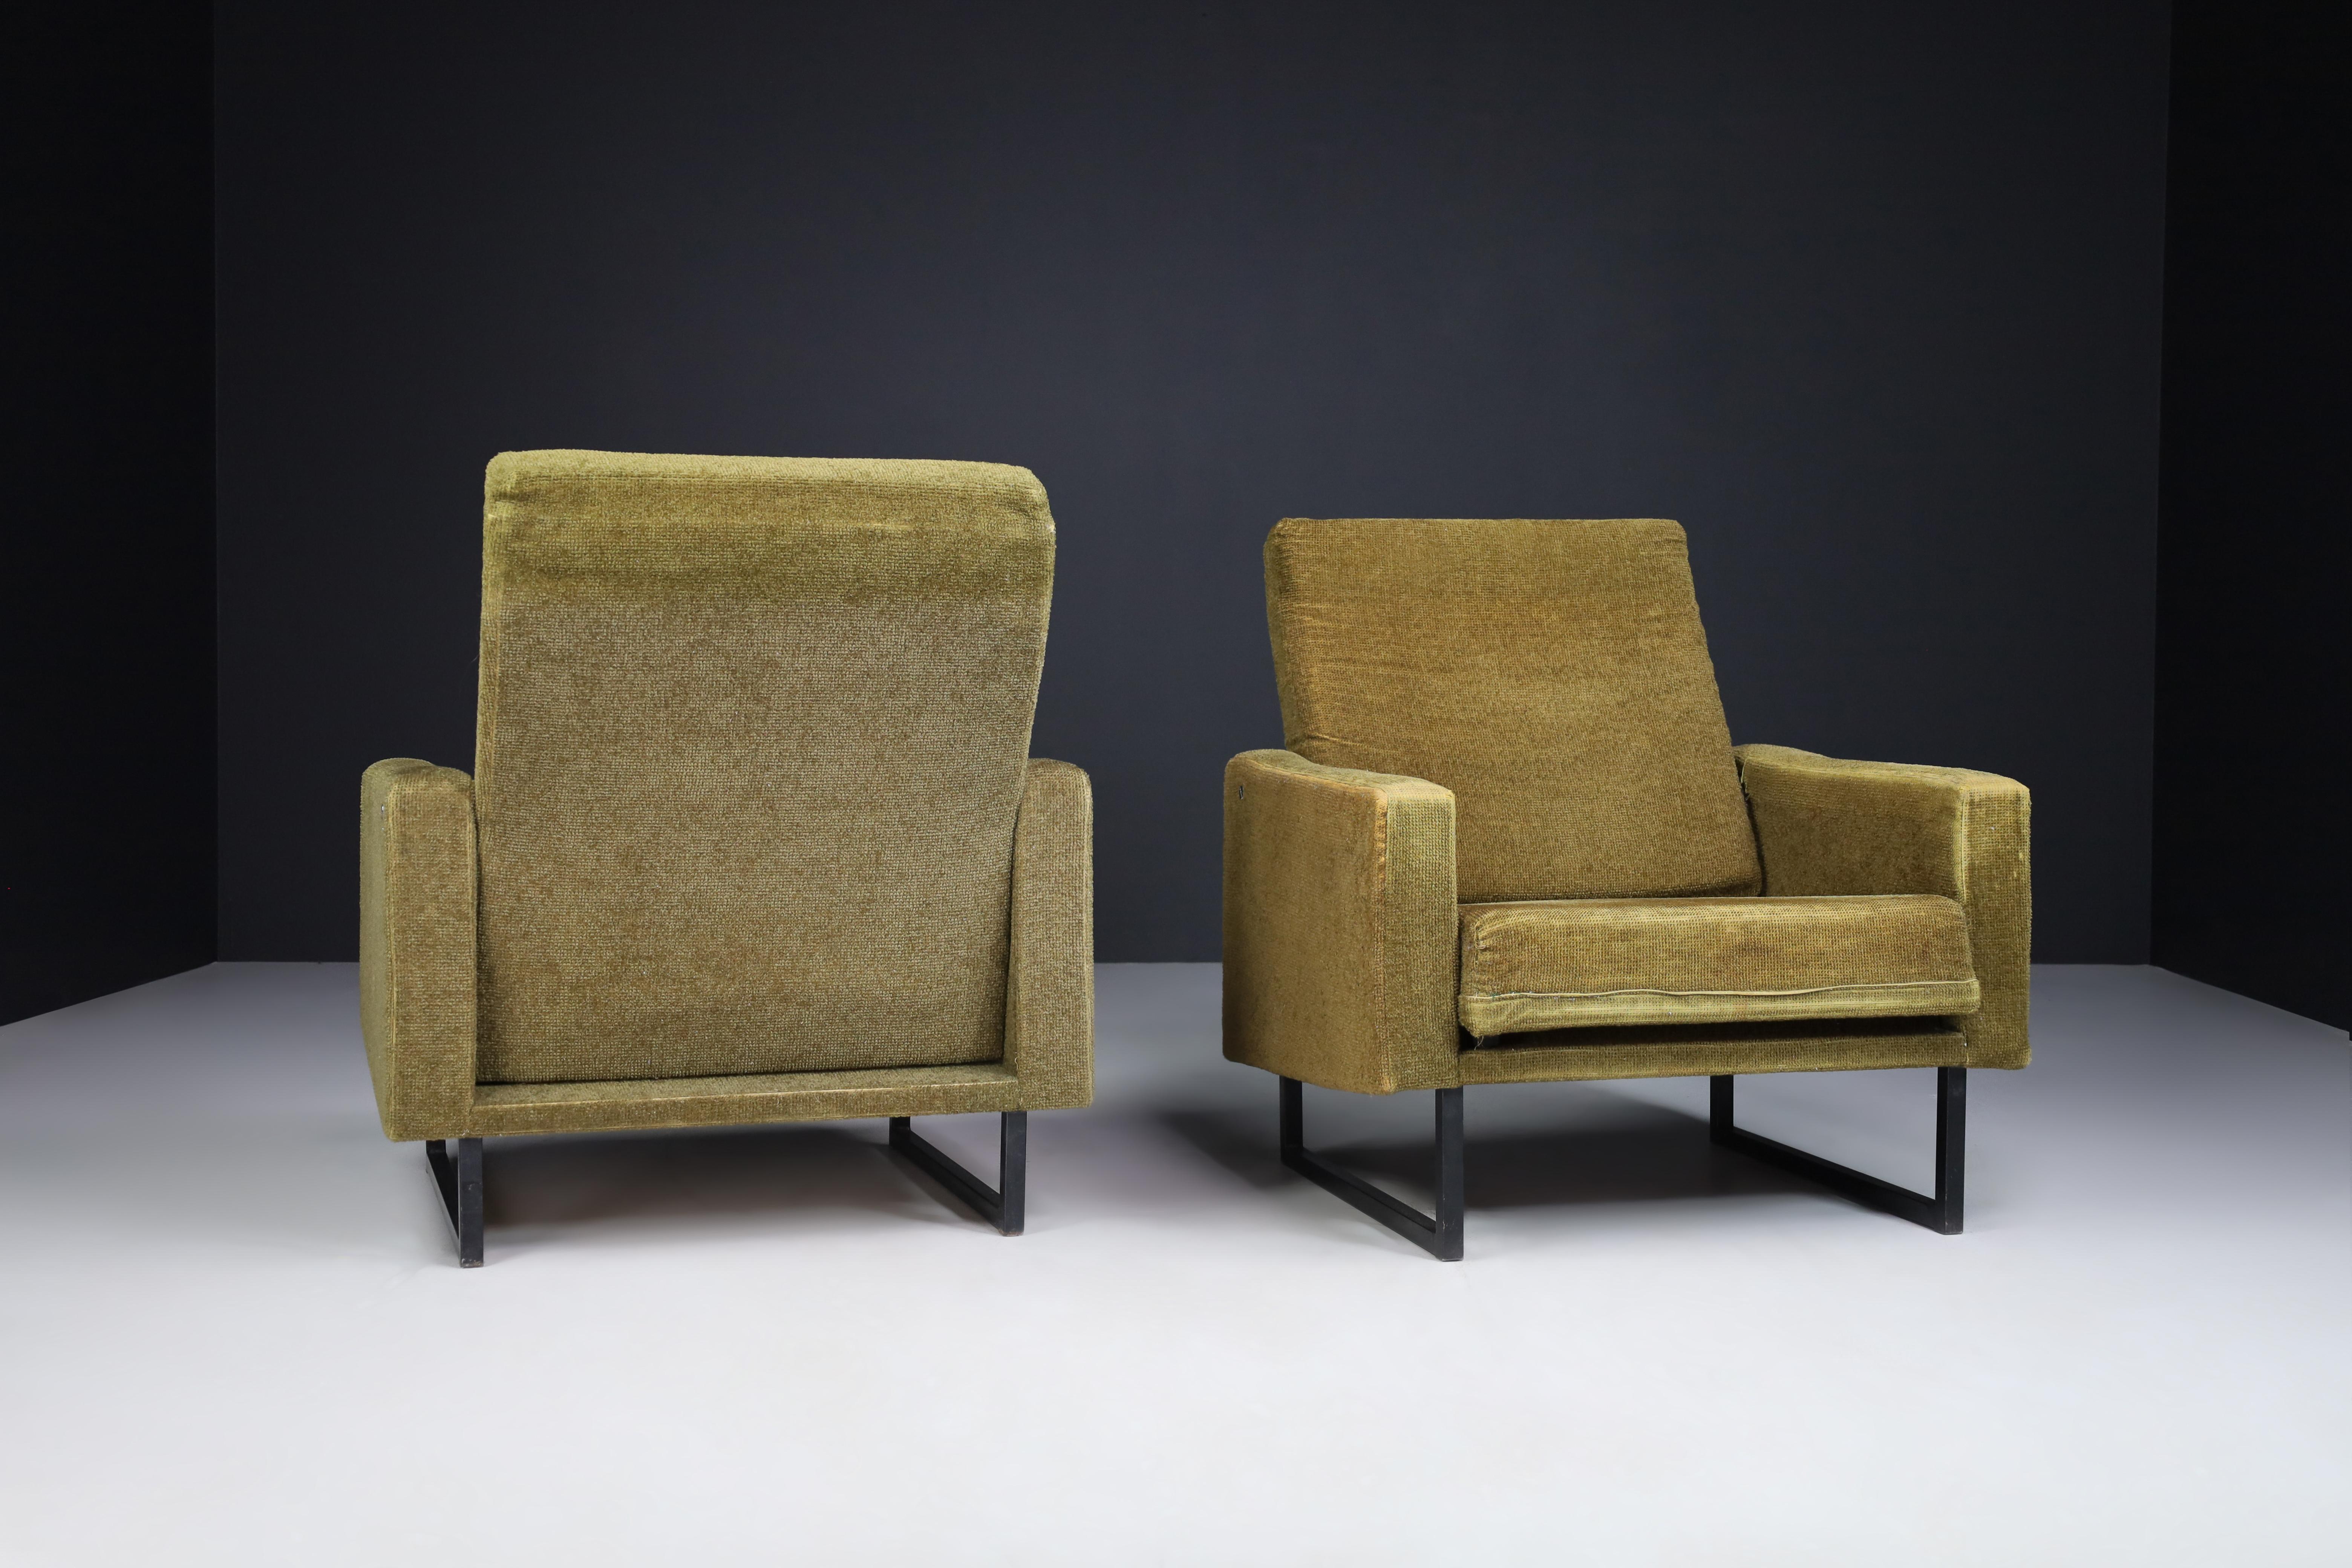 Pair Lounge Chairs by René Jean Caillette for Steiner in Original Fabric, 1963 In Good Condition For Sale In Almelo, NL